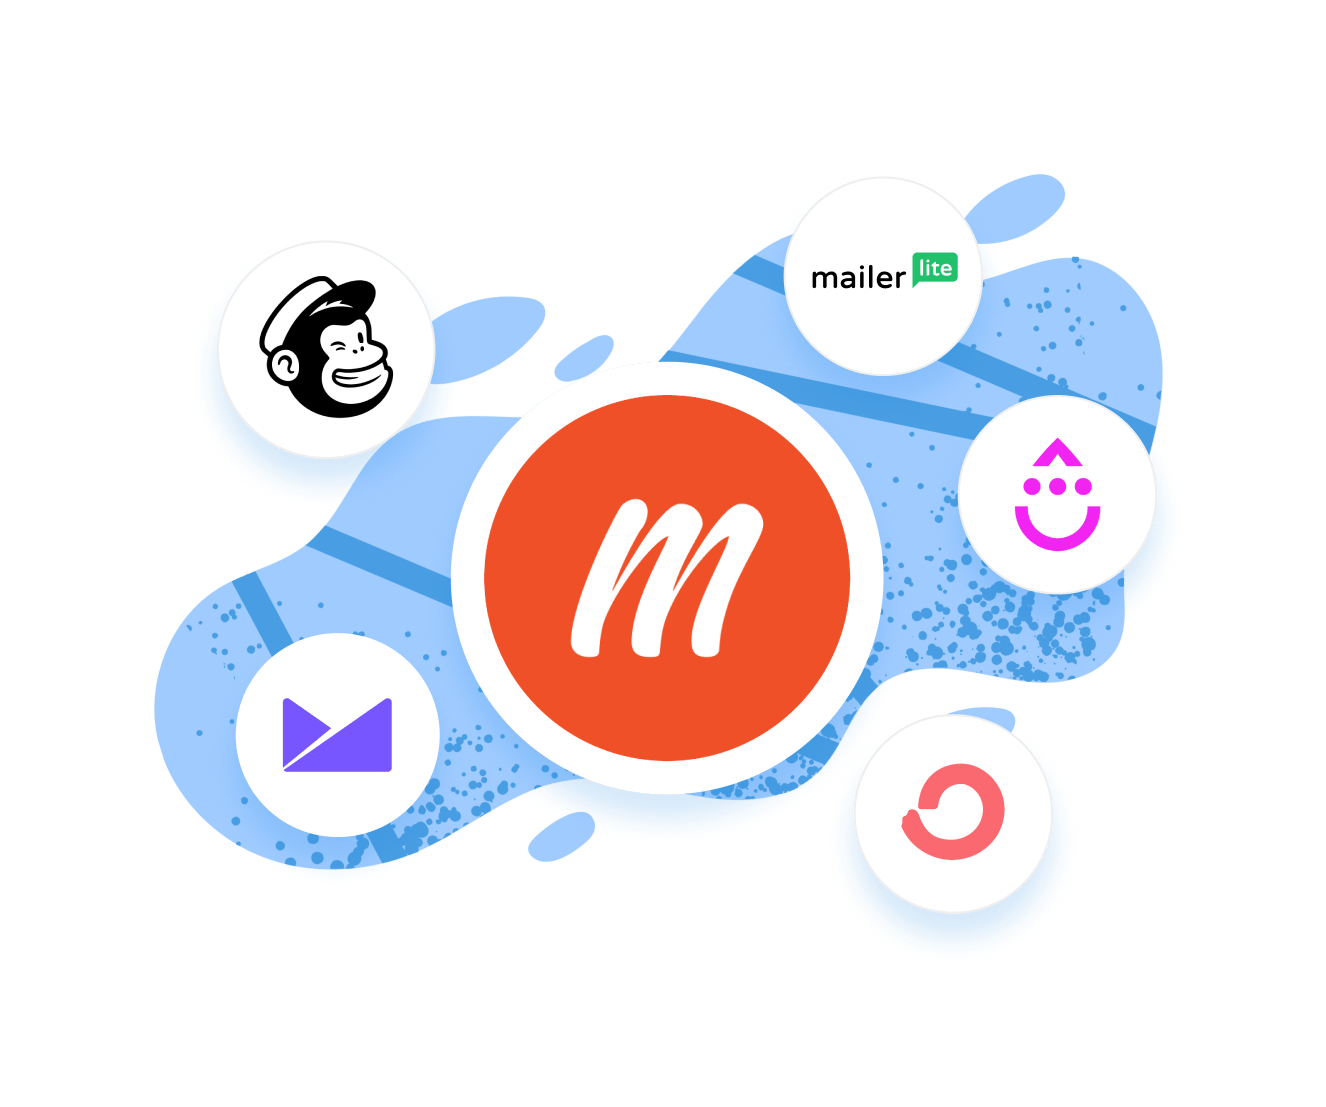 Memberful logo surrounded by email service provider logos